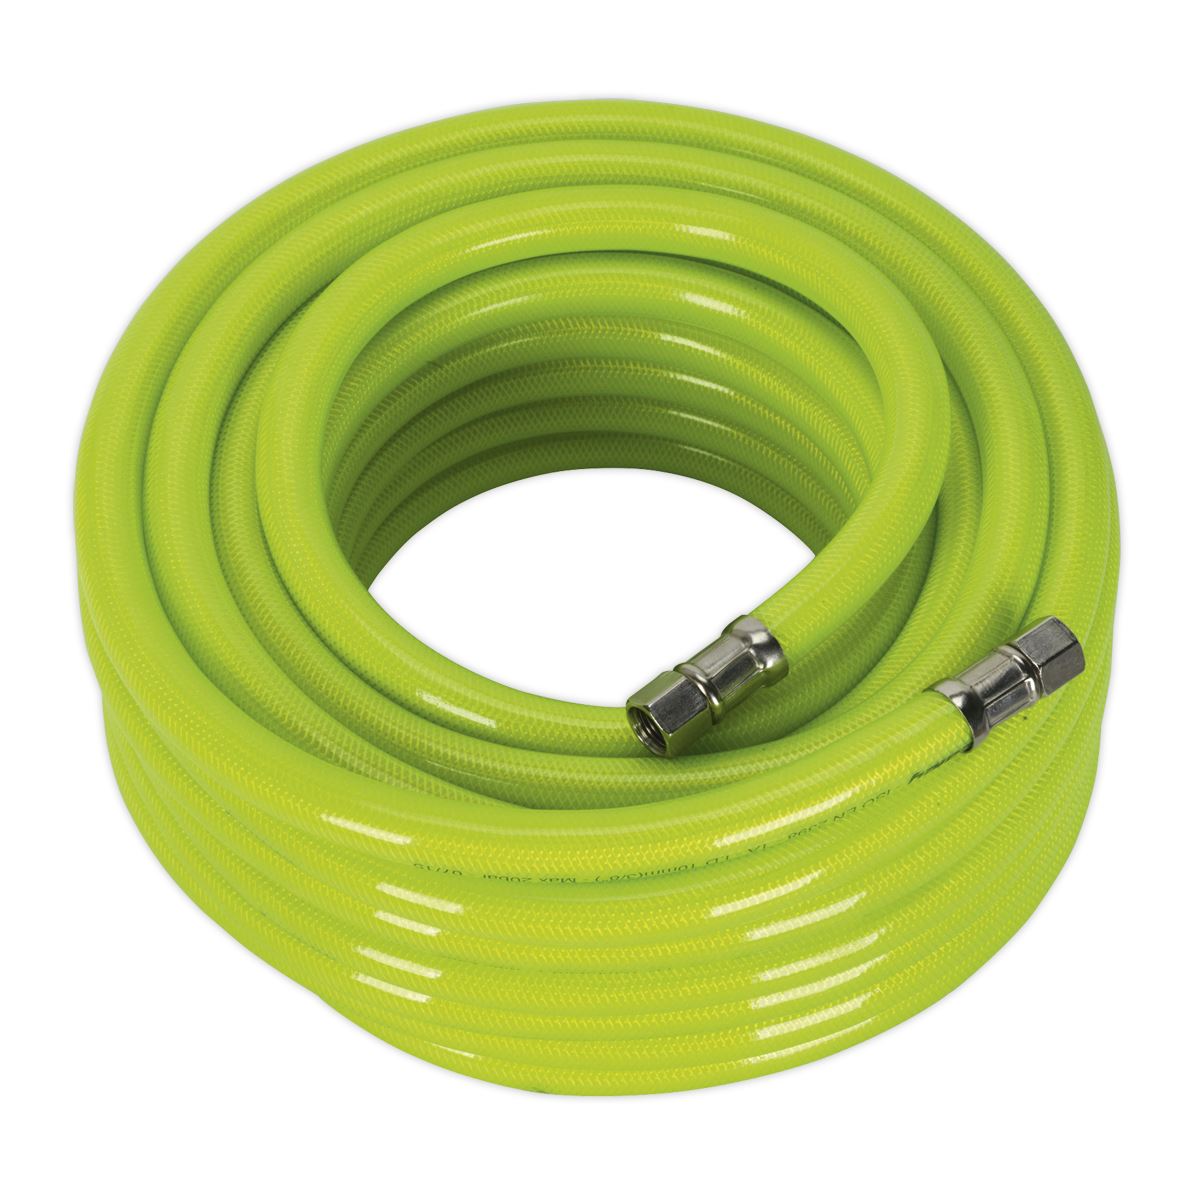 Sealey Air Hose High-Visibility 15m x Ø10mm with 1/4"BSP Unions